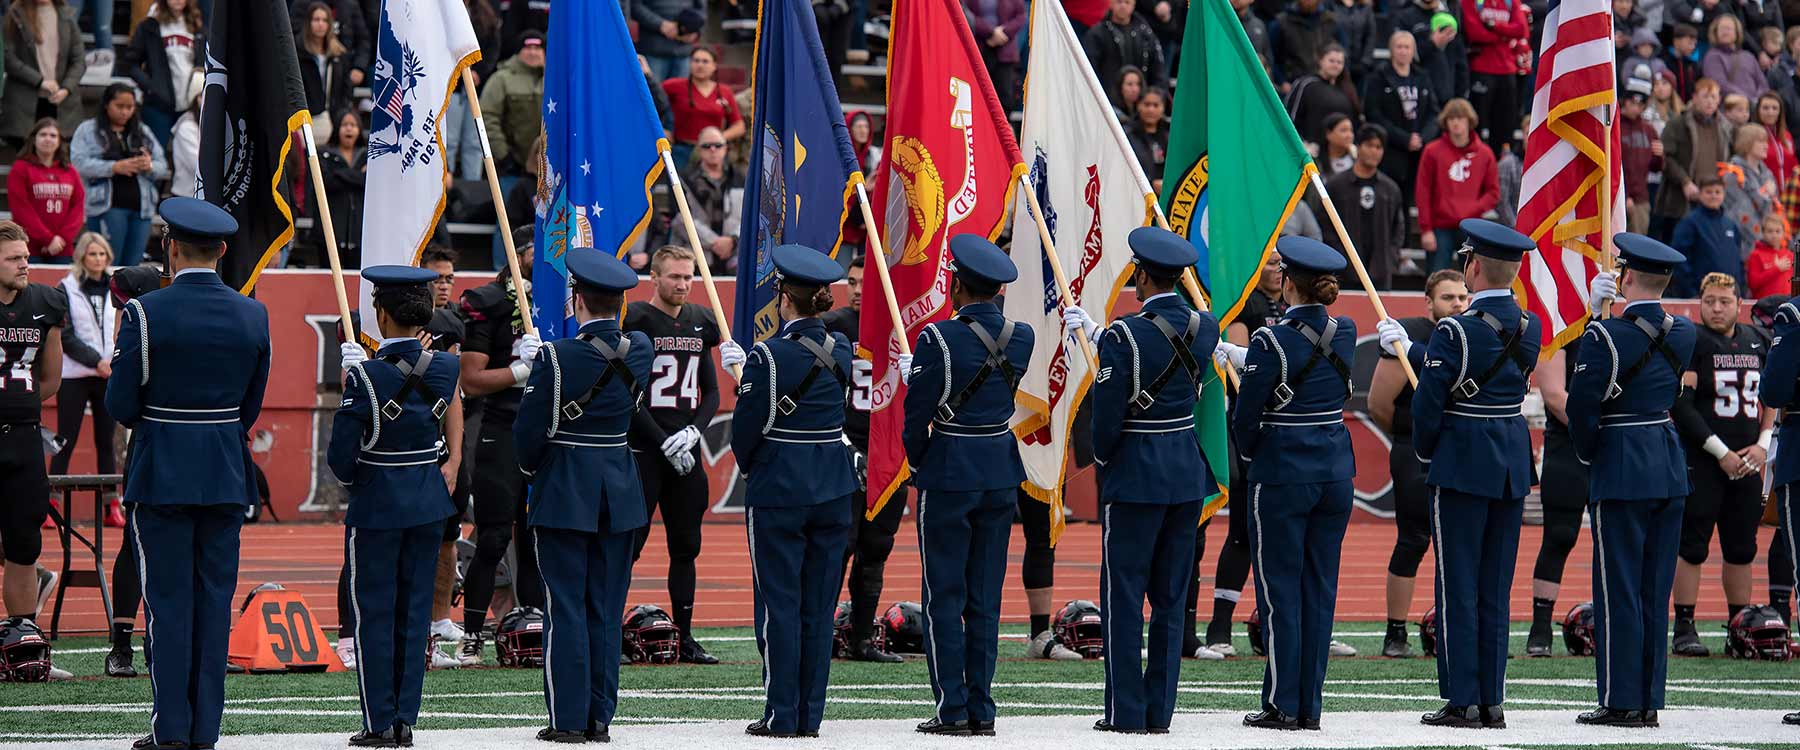 Uniformed officers hold flags, including the American flag, and football players stand in salute.